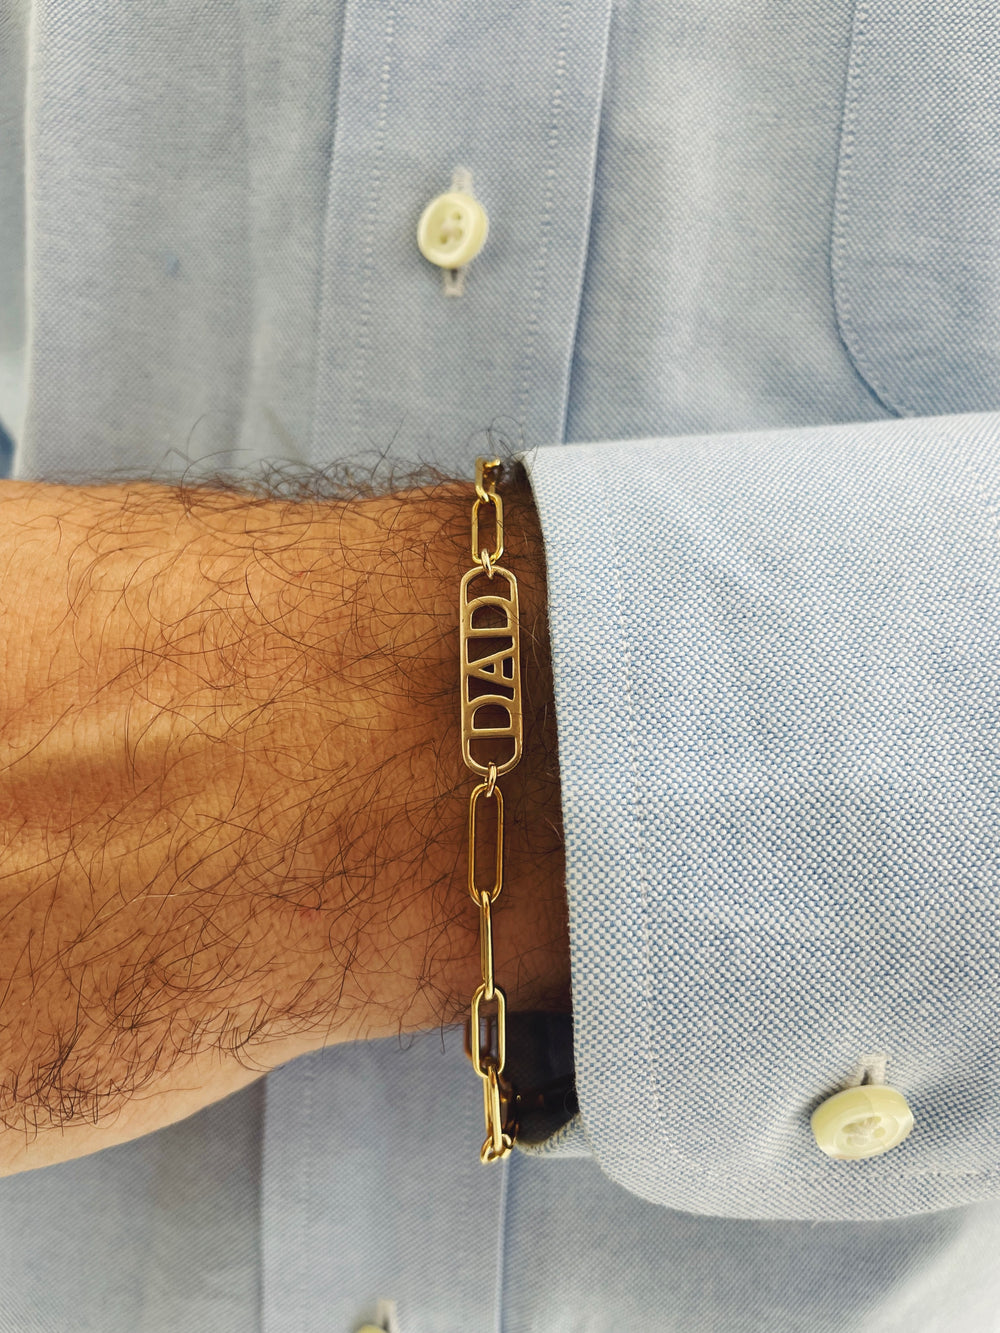 MIMOSA Handcrafted's Gold-Filled Bracelet for Dad